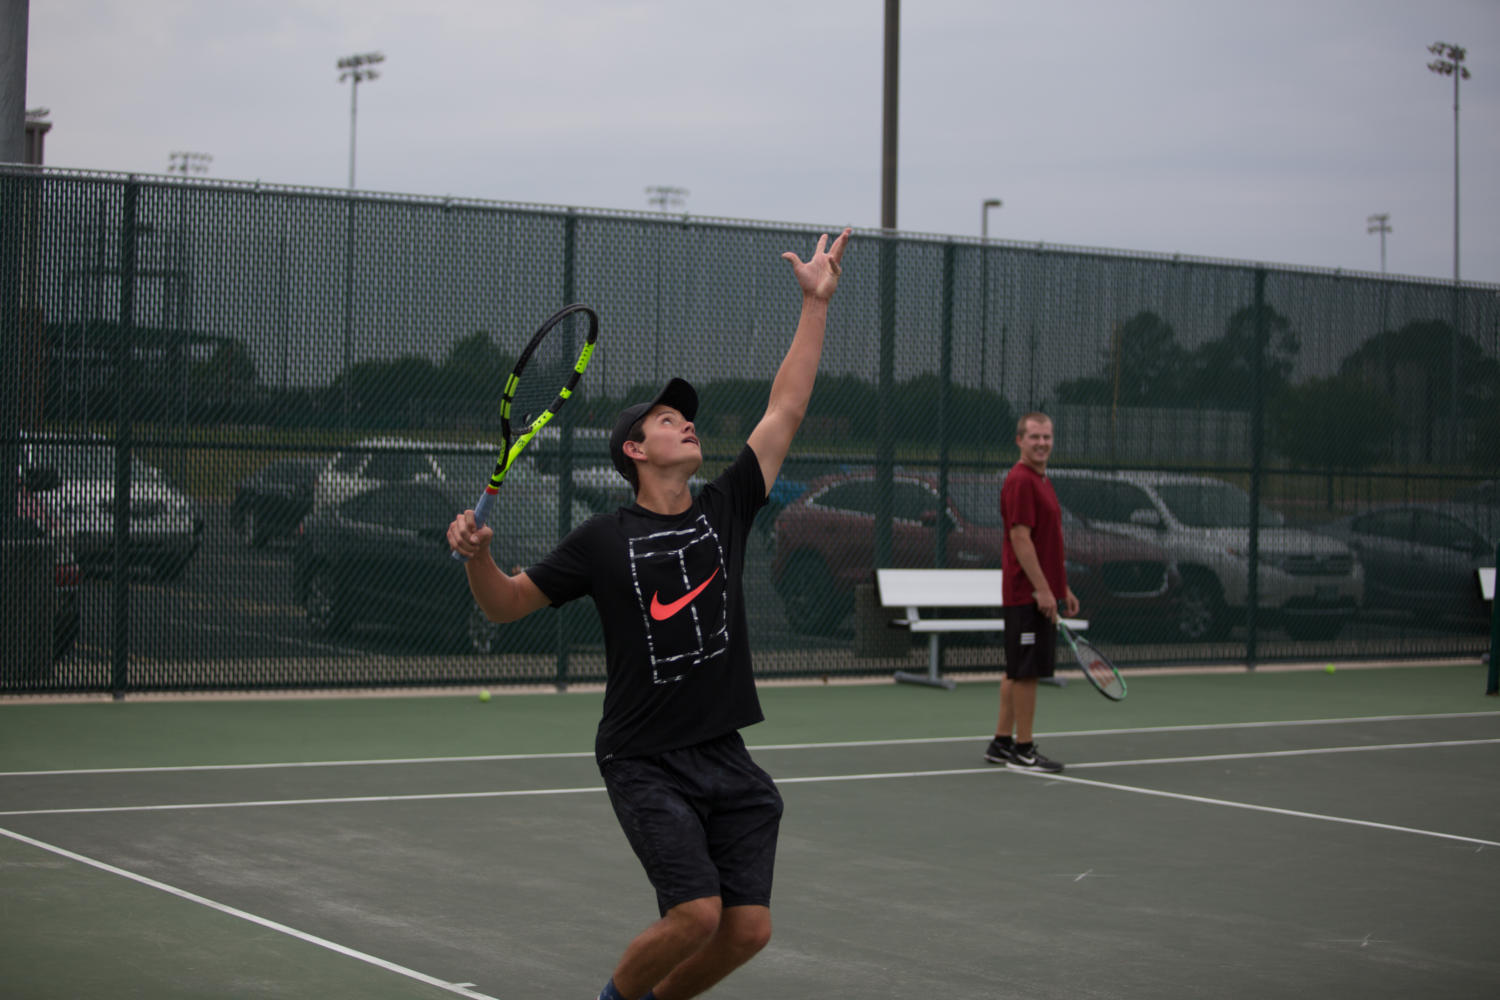 Champion Team Matt Hynek and Coach Sutton work their way to the top of the bracket at the Staff/Student Tennis Tournament on May 9, 2017 in Argyle, TX. (Kirby Reyes/The Talon News)